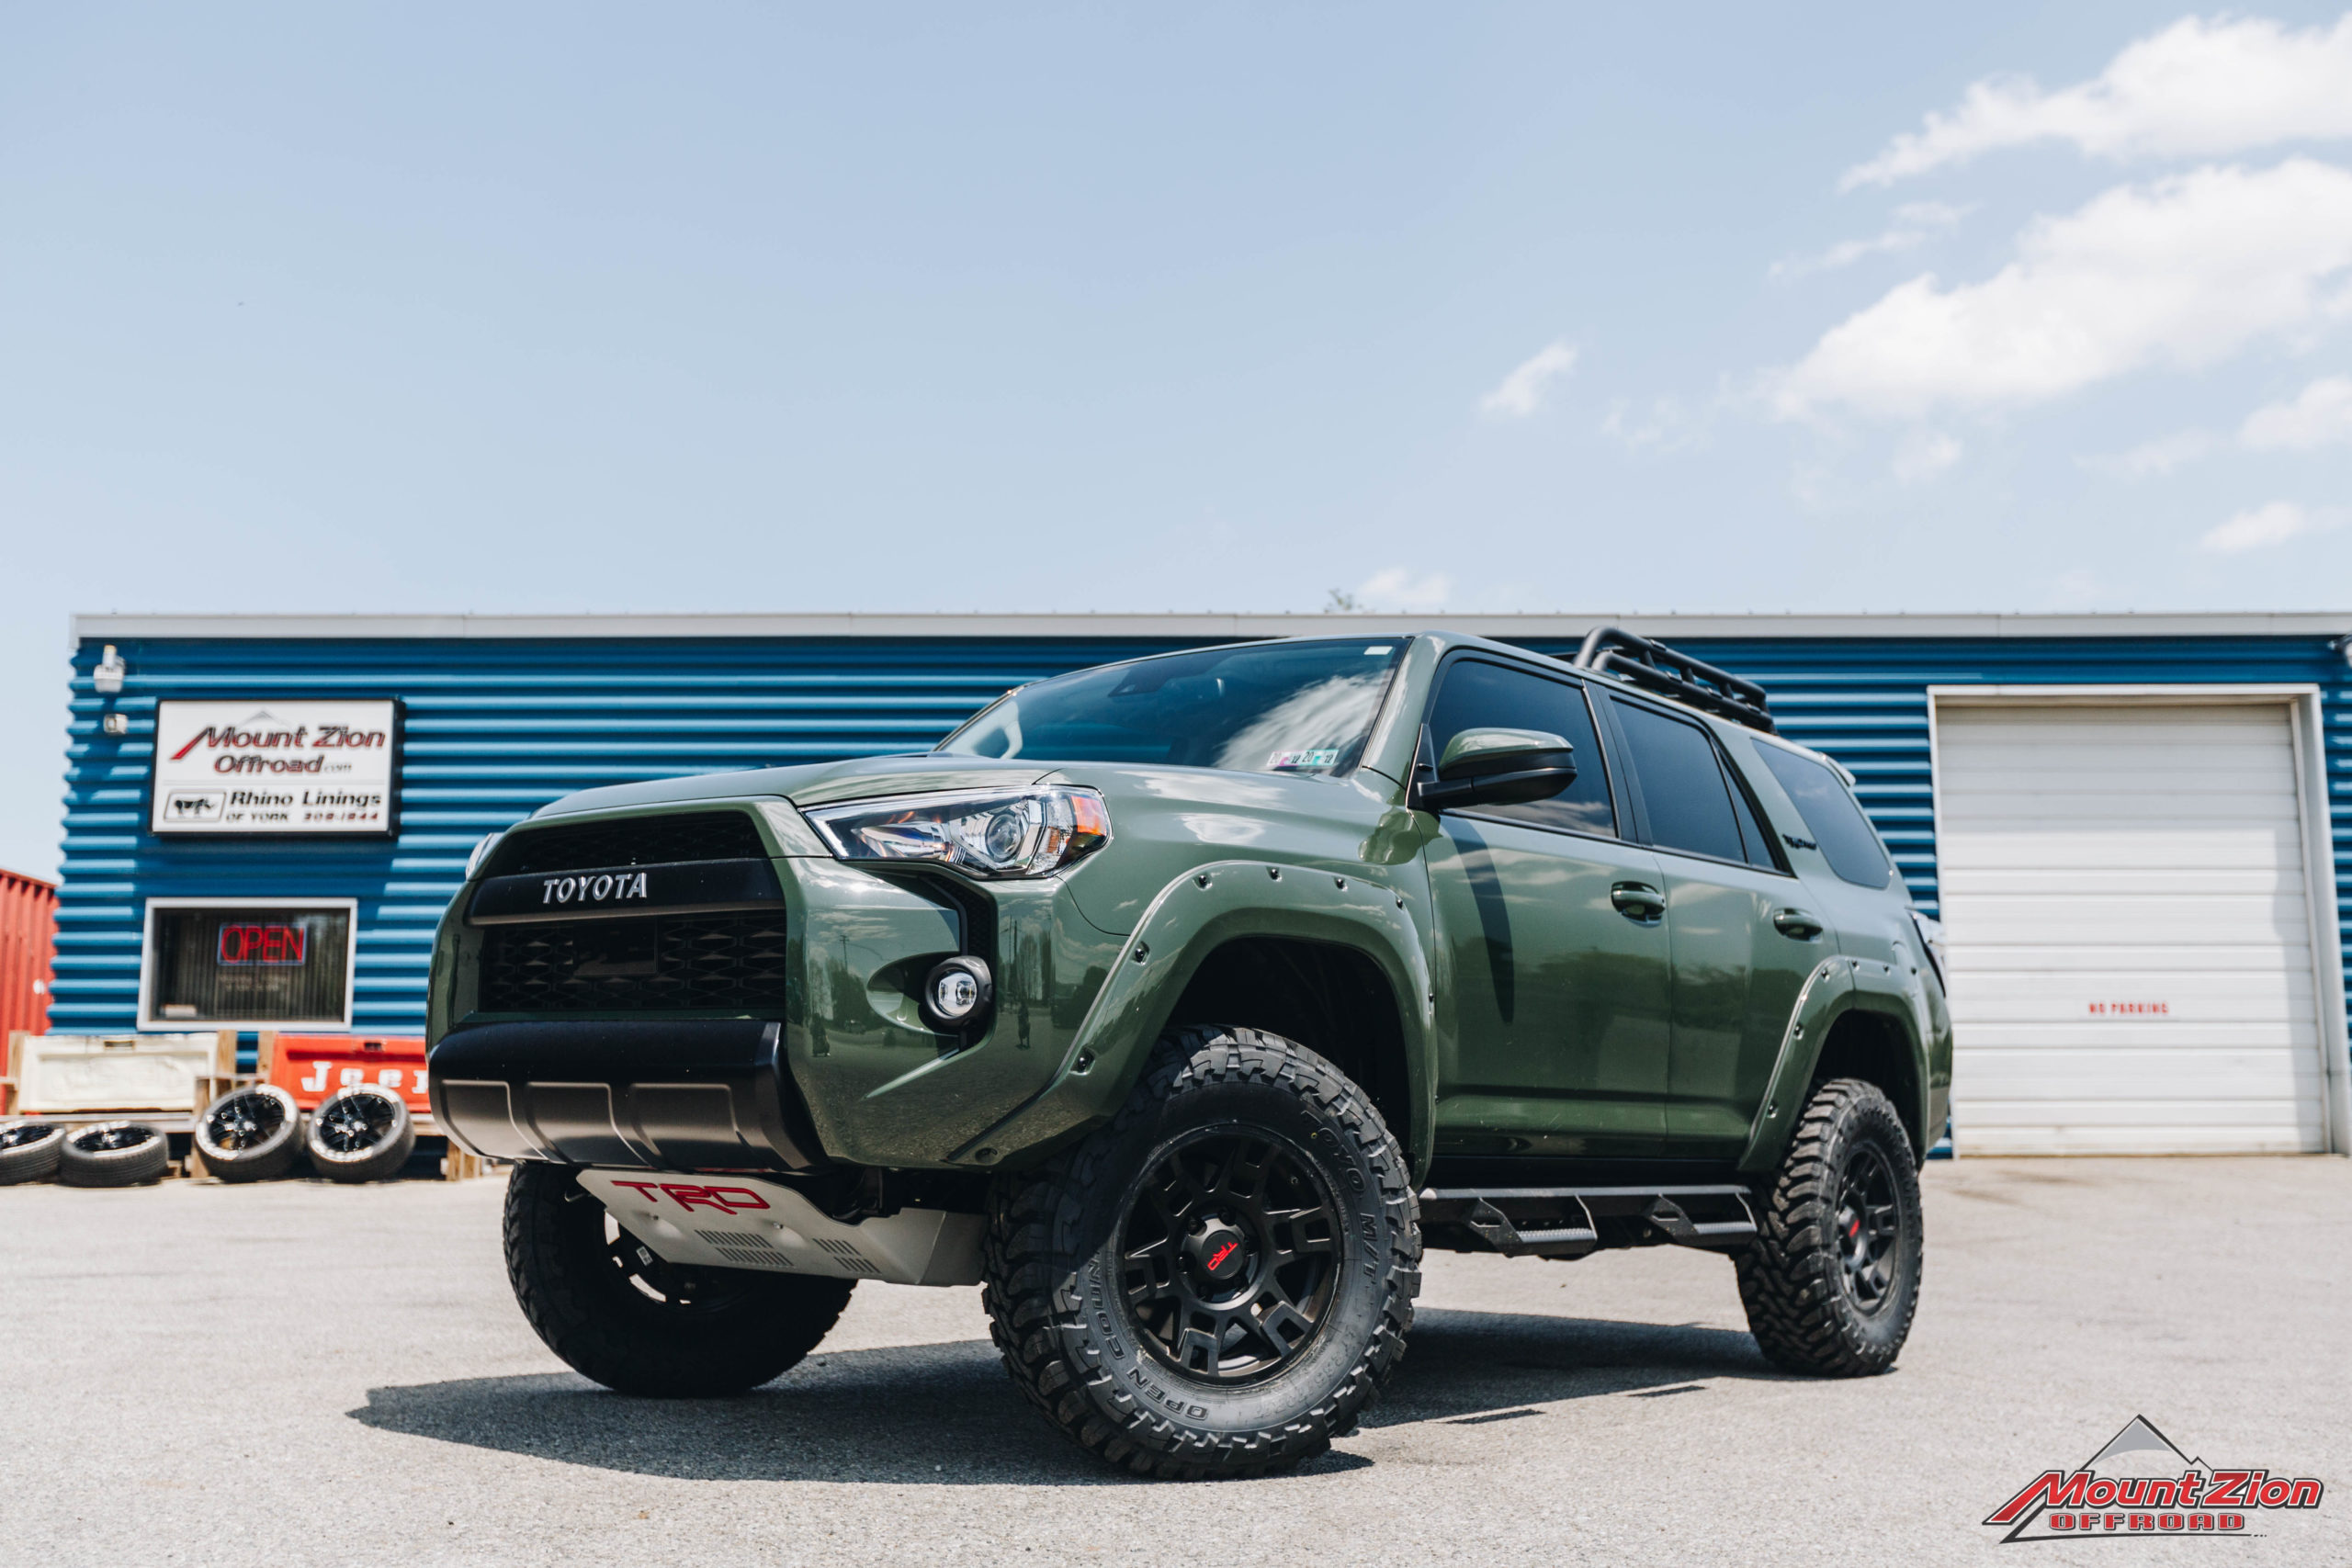 Toyota 4runner Trd Pro Mount Zion Offroad